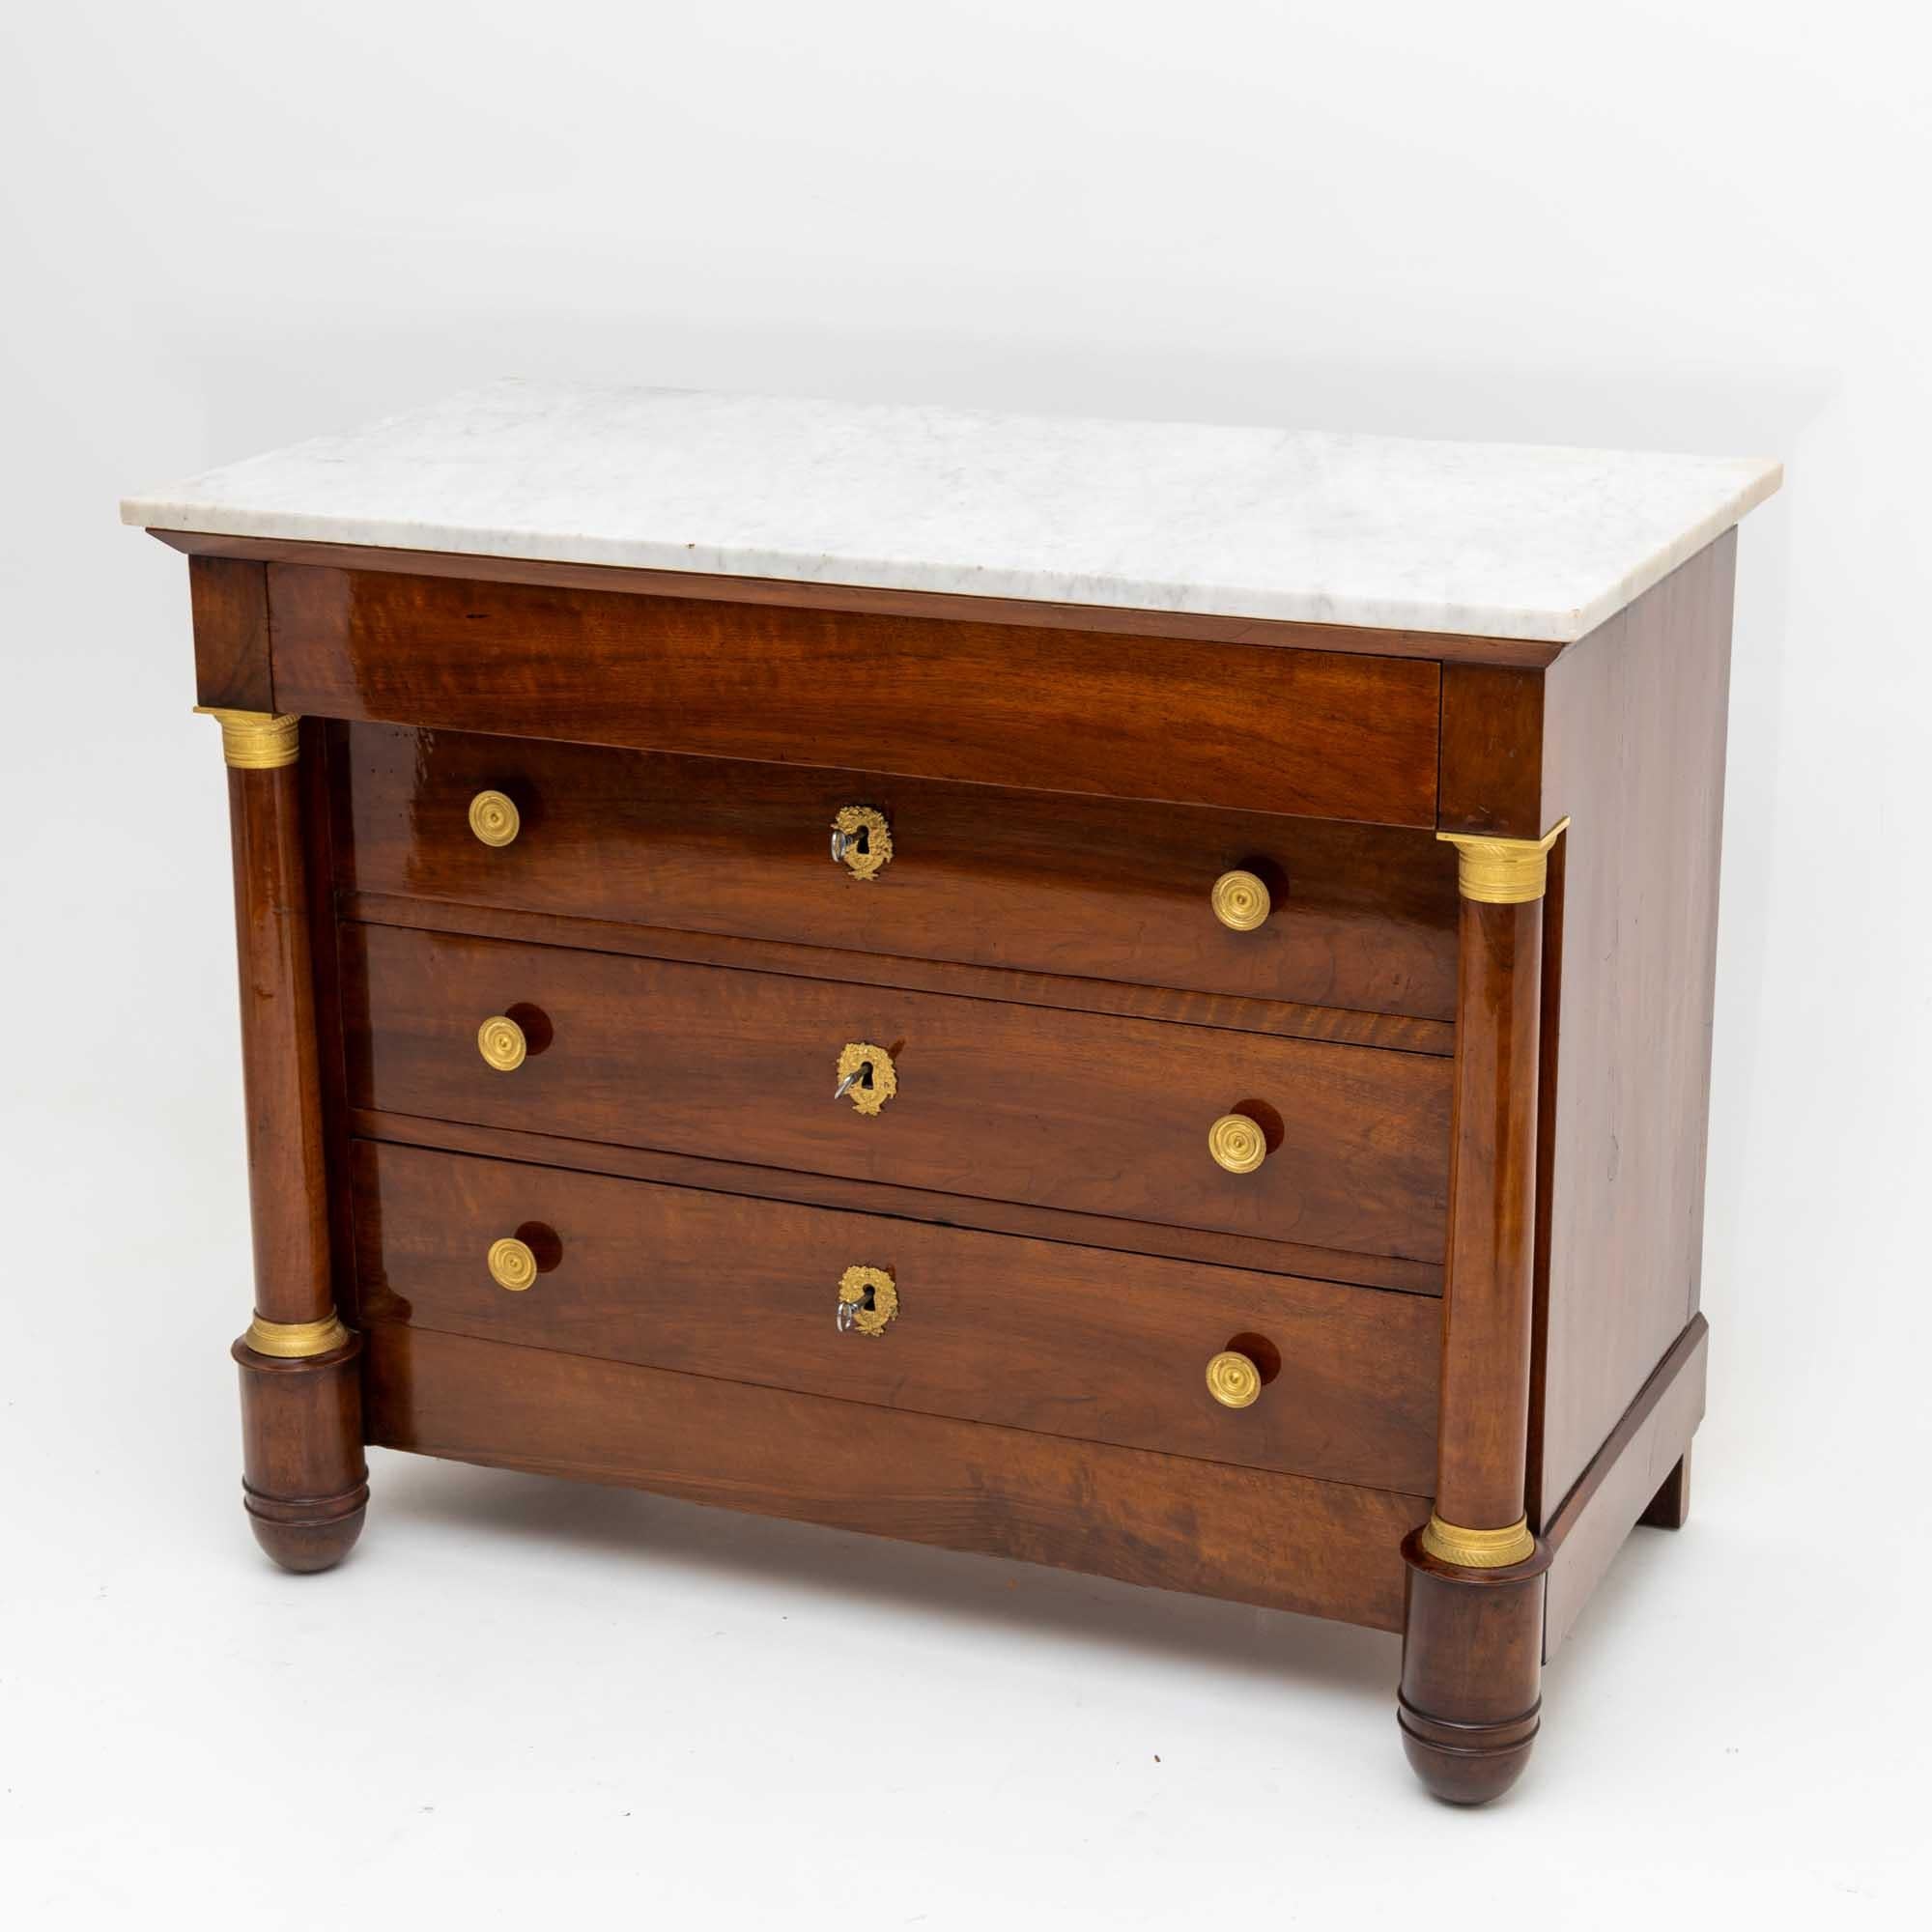 French Empire chest of drawers veneered in mahogany, with four drawers and white marble top. The corpus is flanked by columns with fire-gilded bases and capitals, which merge into the conical front feet. The head drawer rests on the capitals and has